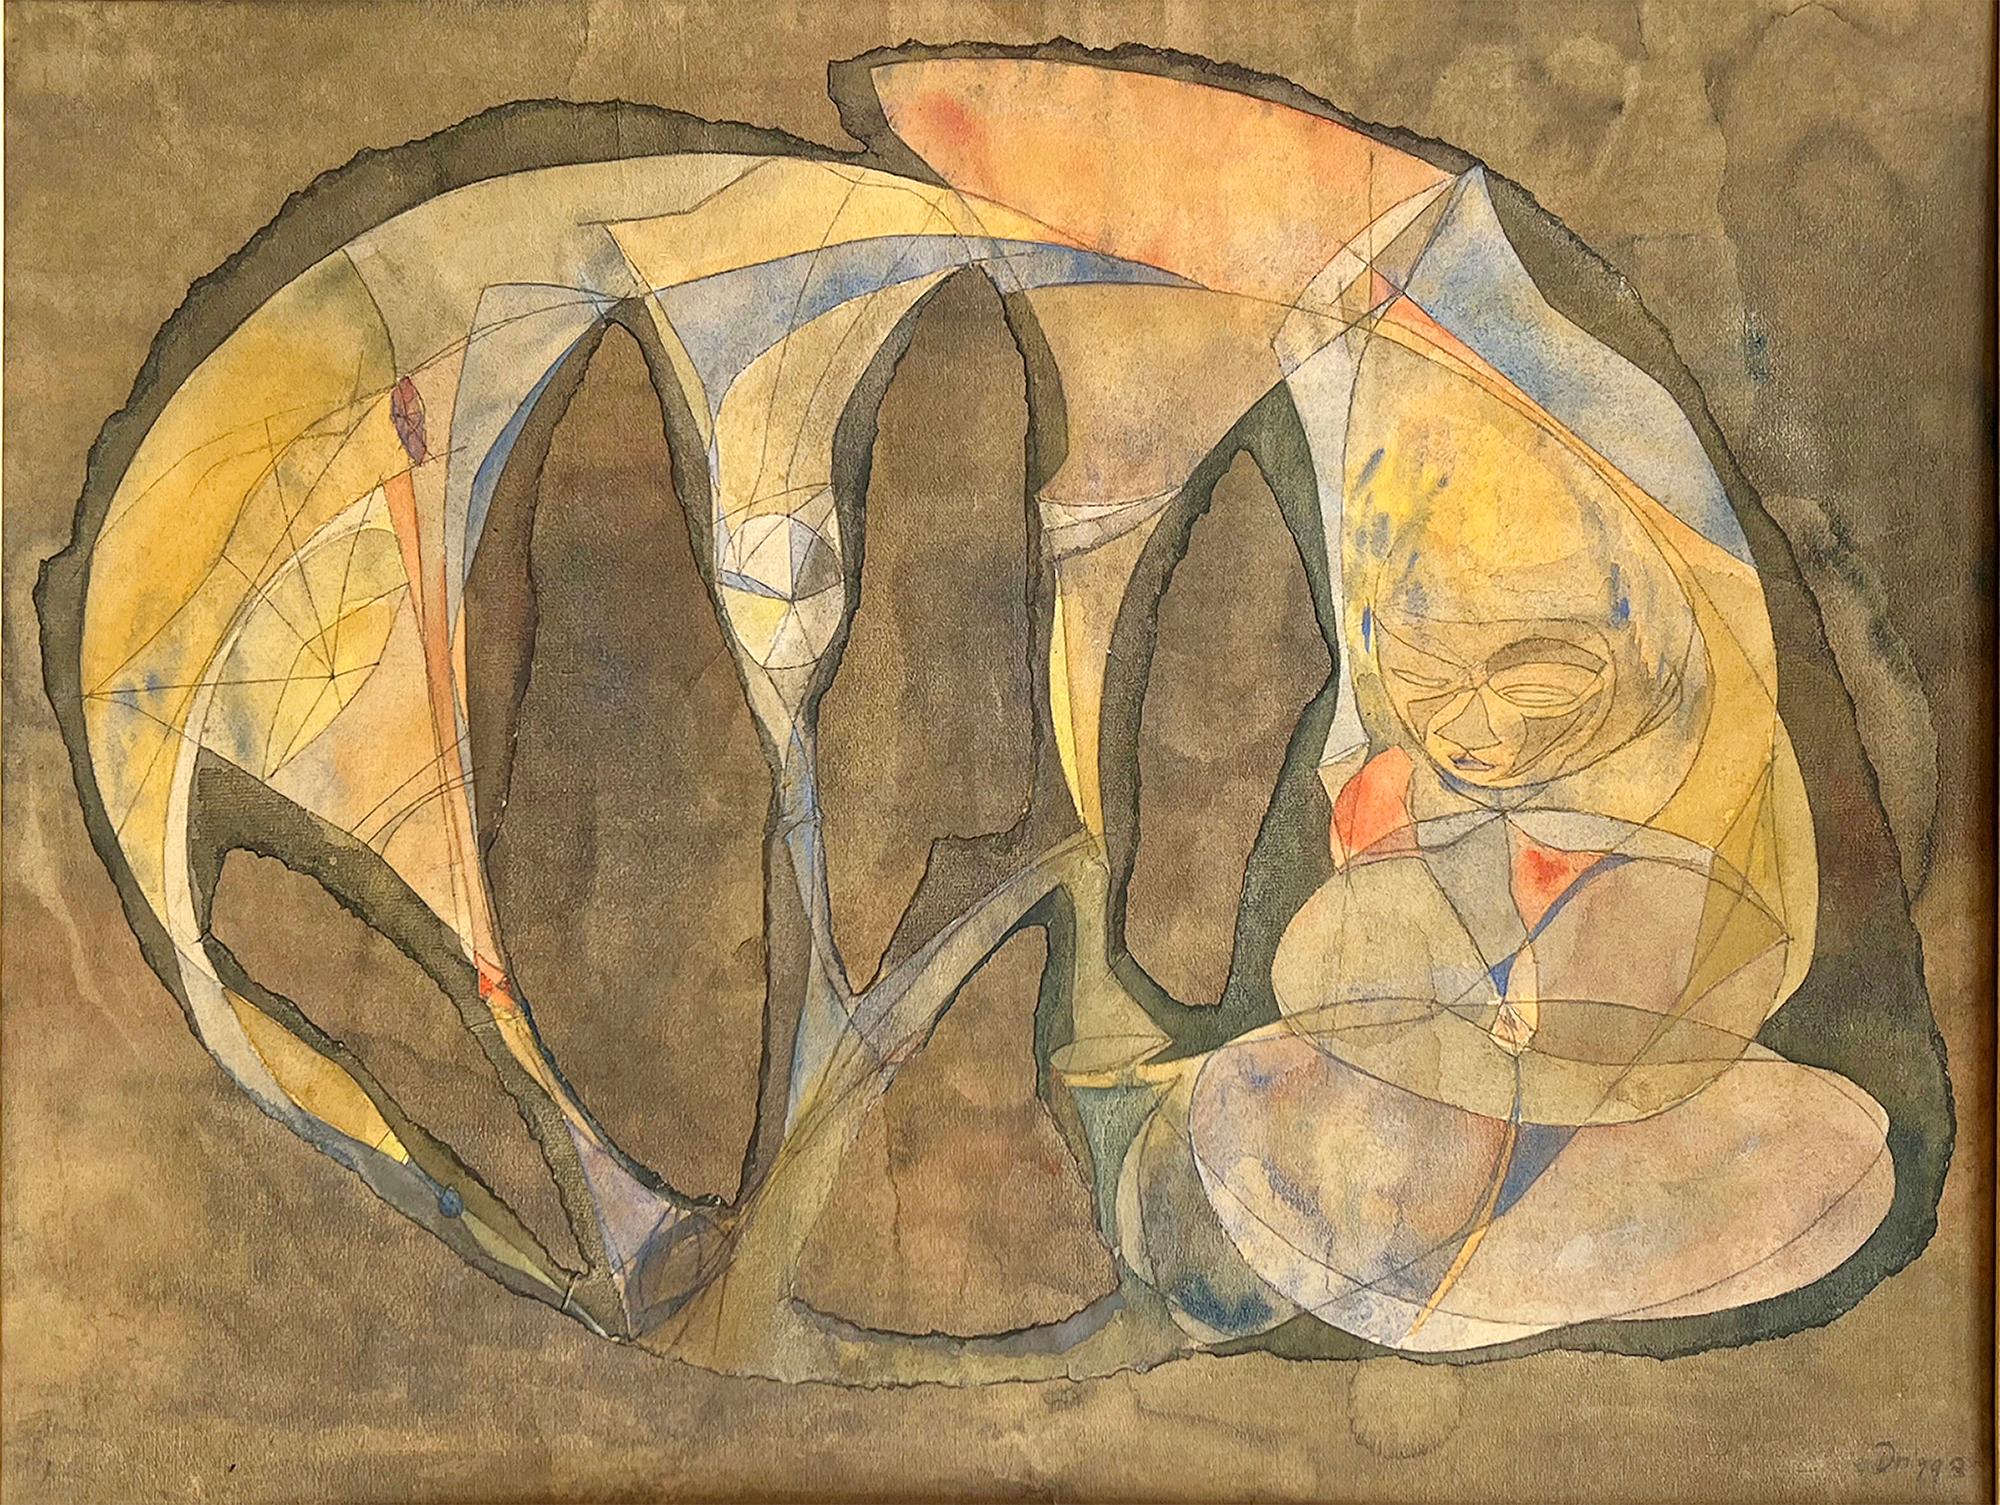  Pre-War Abstraction - Modernism - Tan Bronze Tope - Nonrepresentational - Mixed Media Art by Elsie Driggs